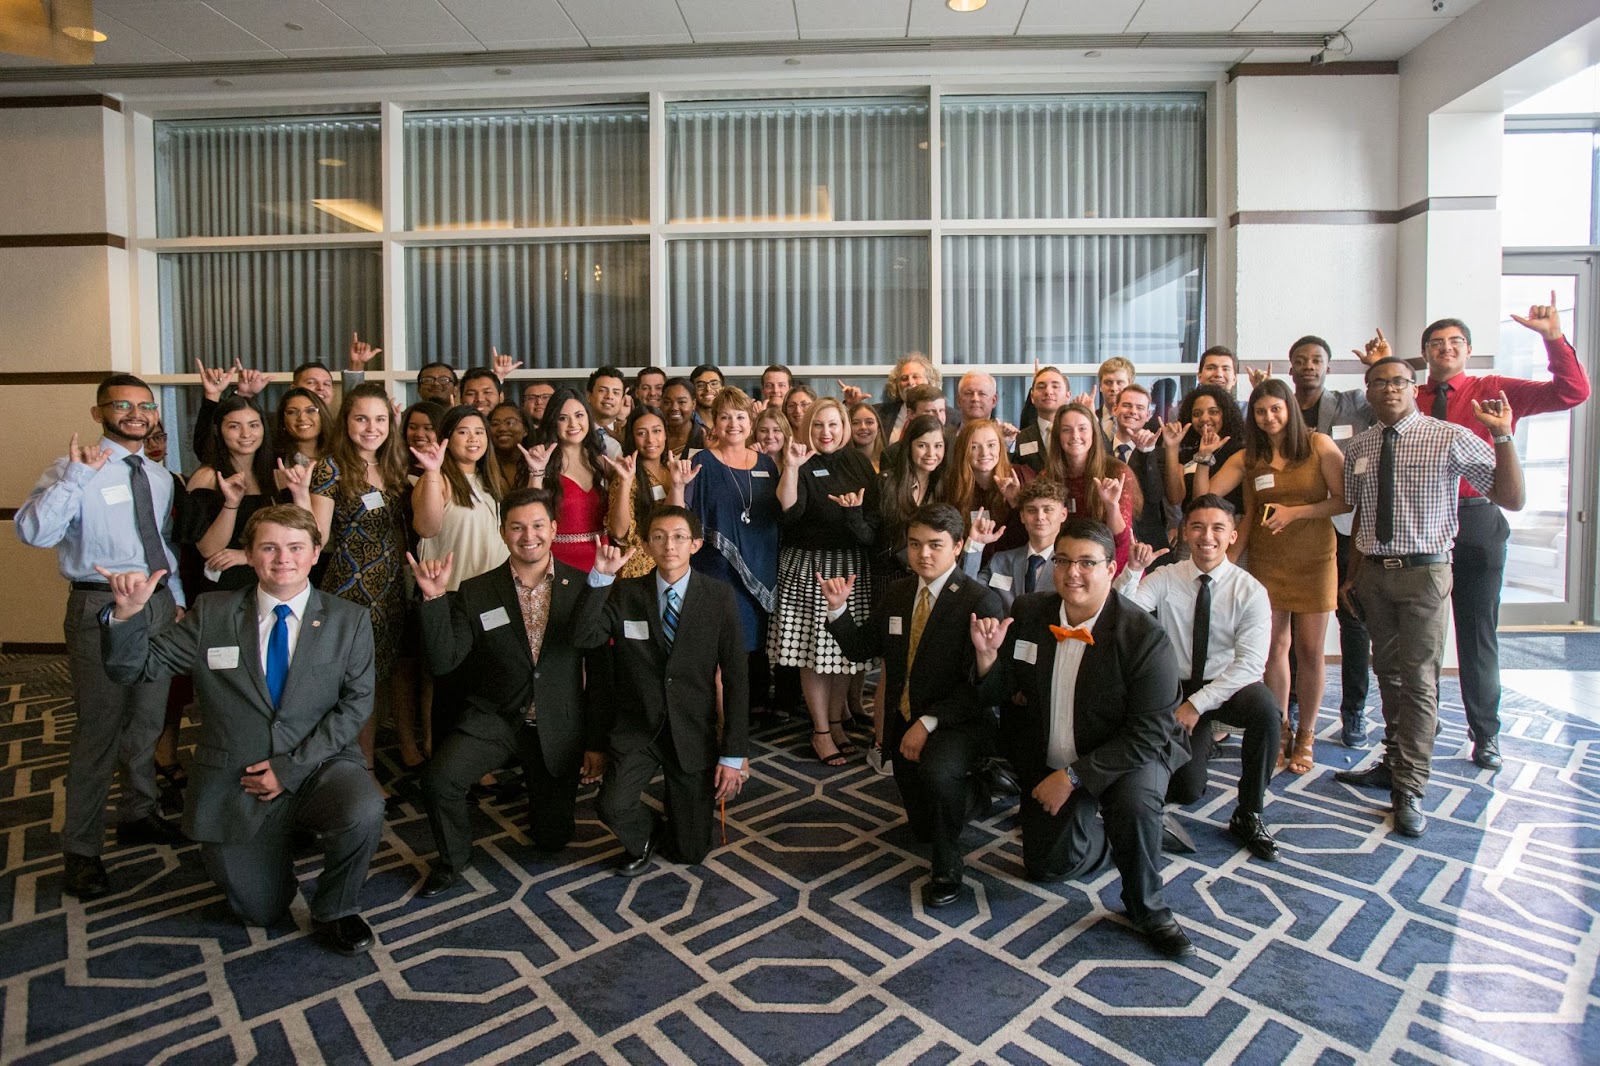 Students posing for a photo during the Texas Leadership Forum